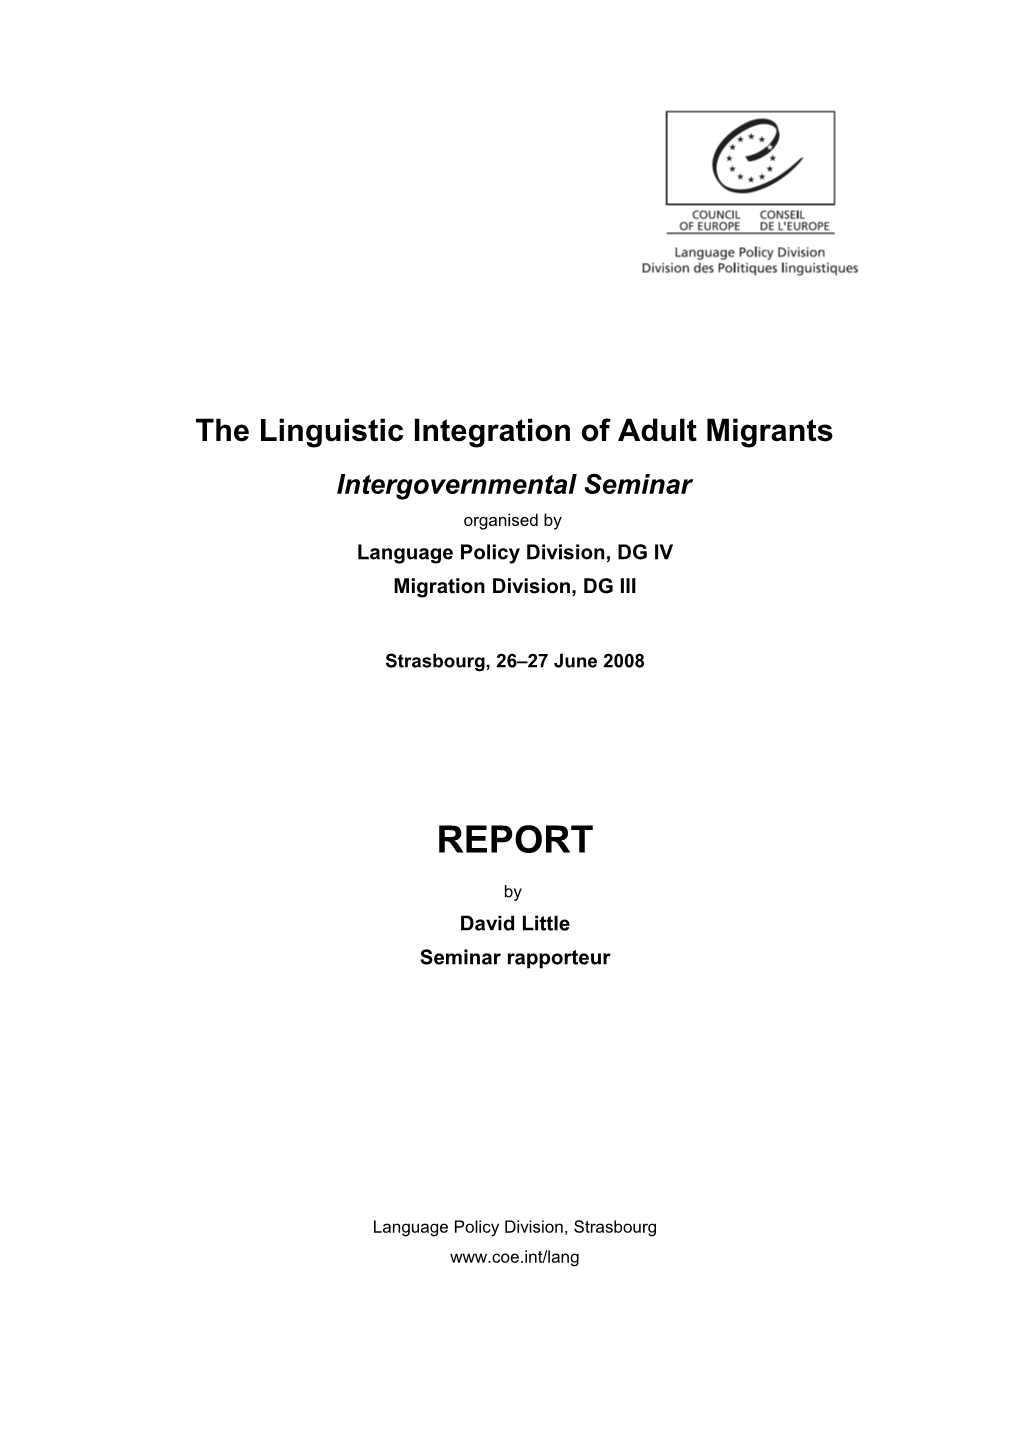 The Linguistic Integration of Adult Migrants